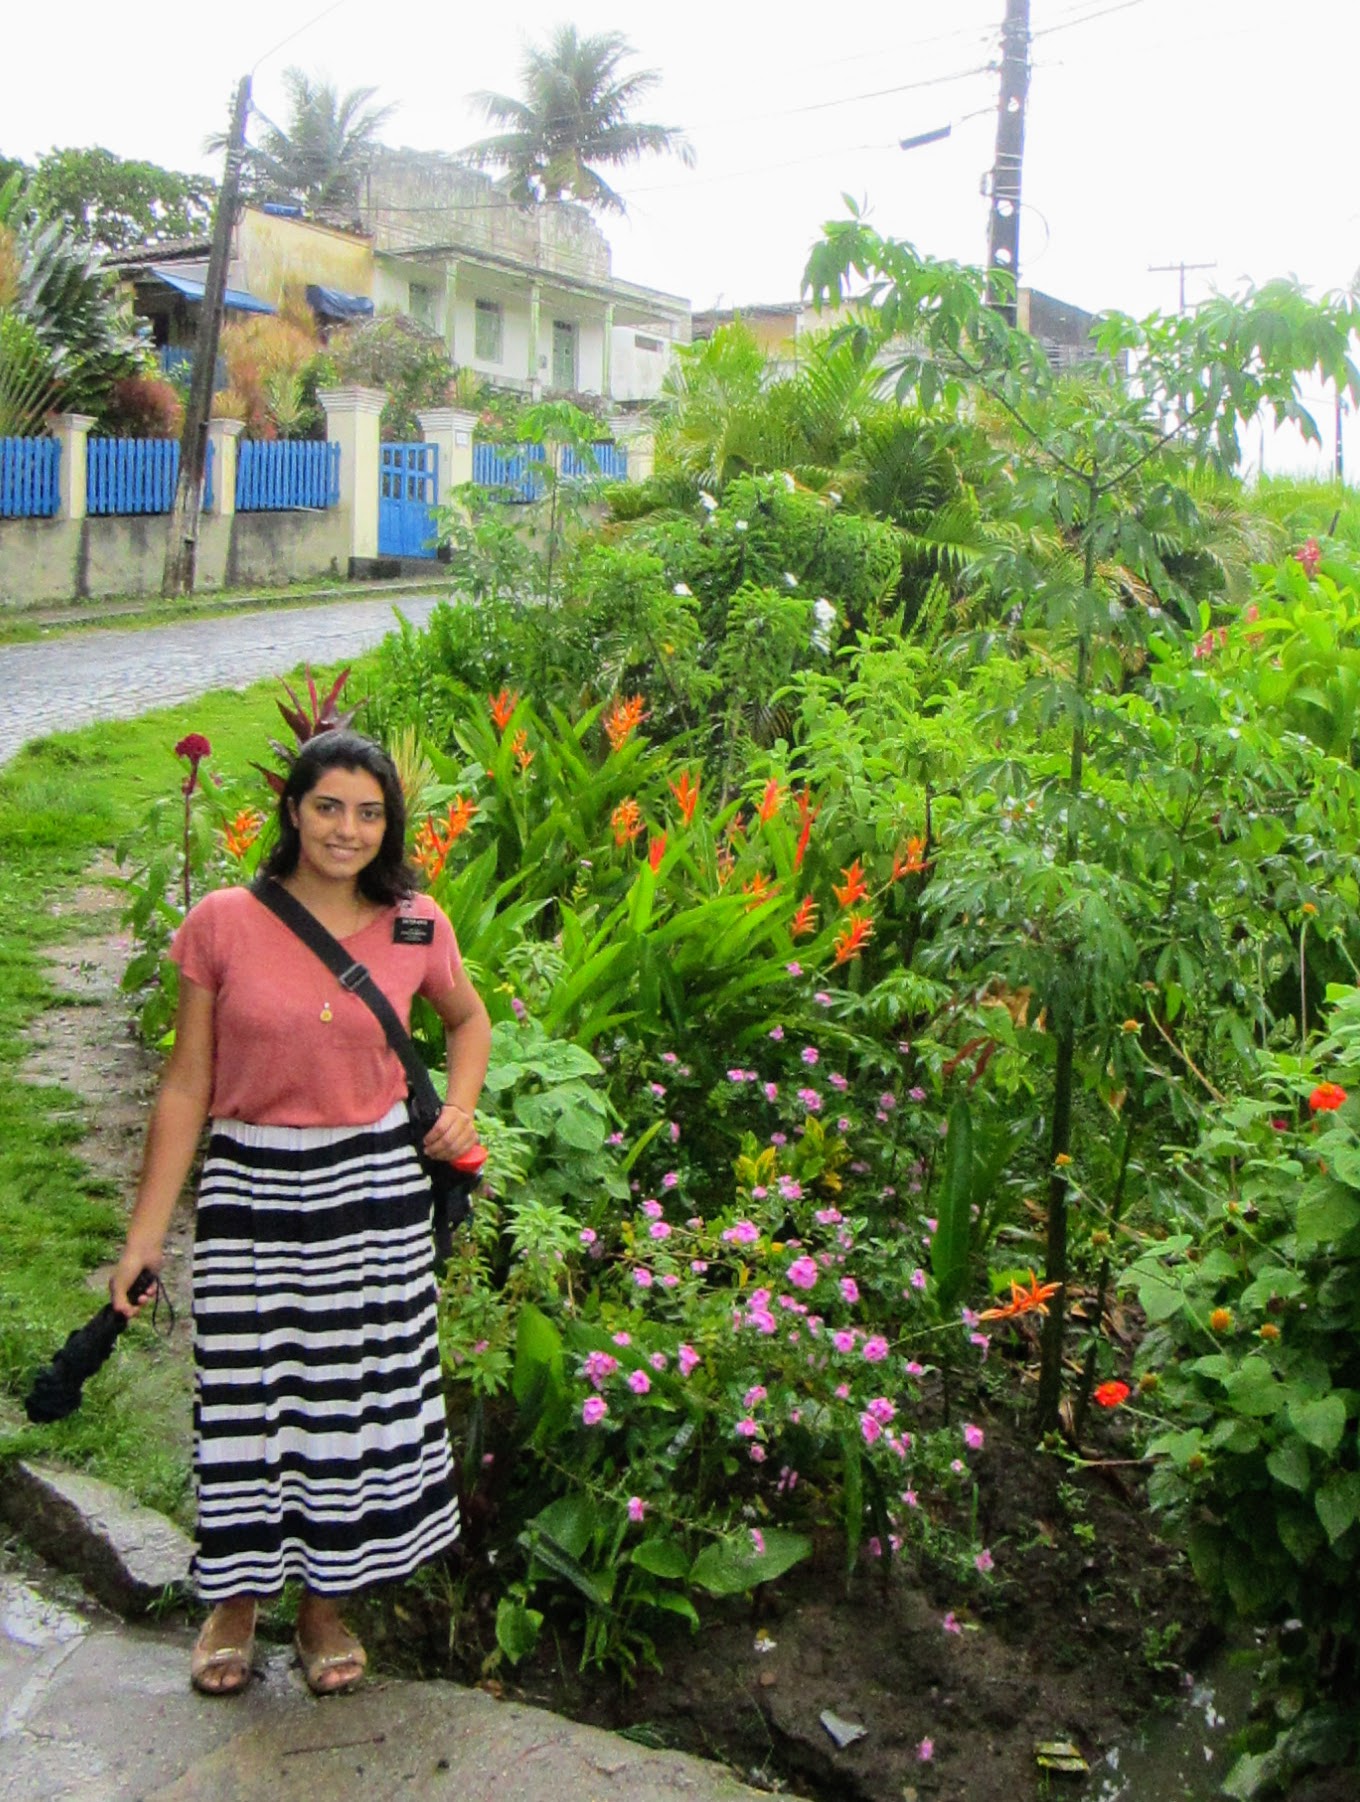 Sister Arece standing outside near the street in front of lush tropical foliage and flowers.